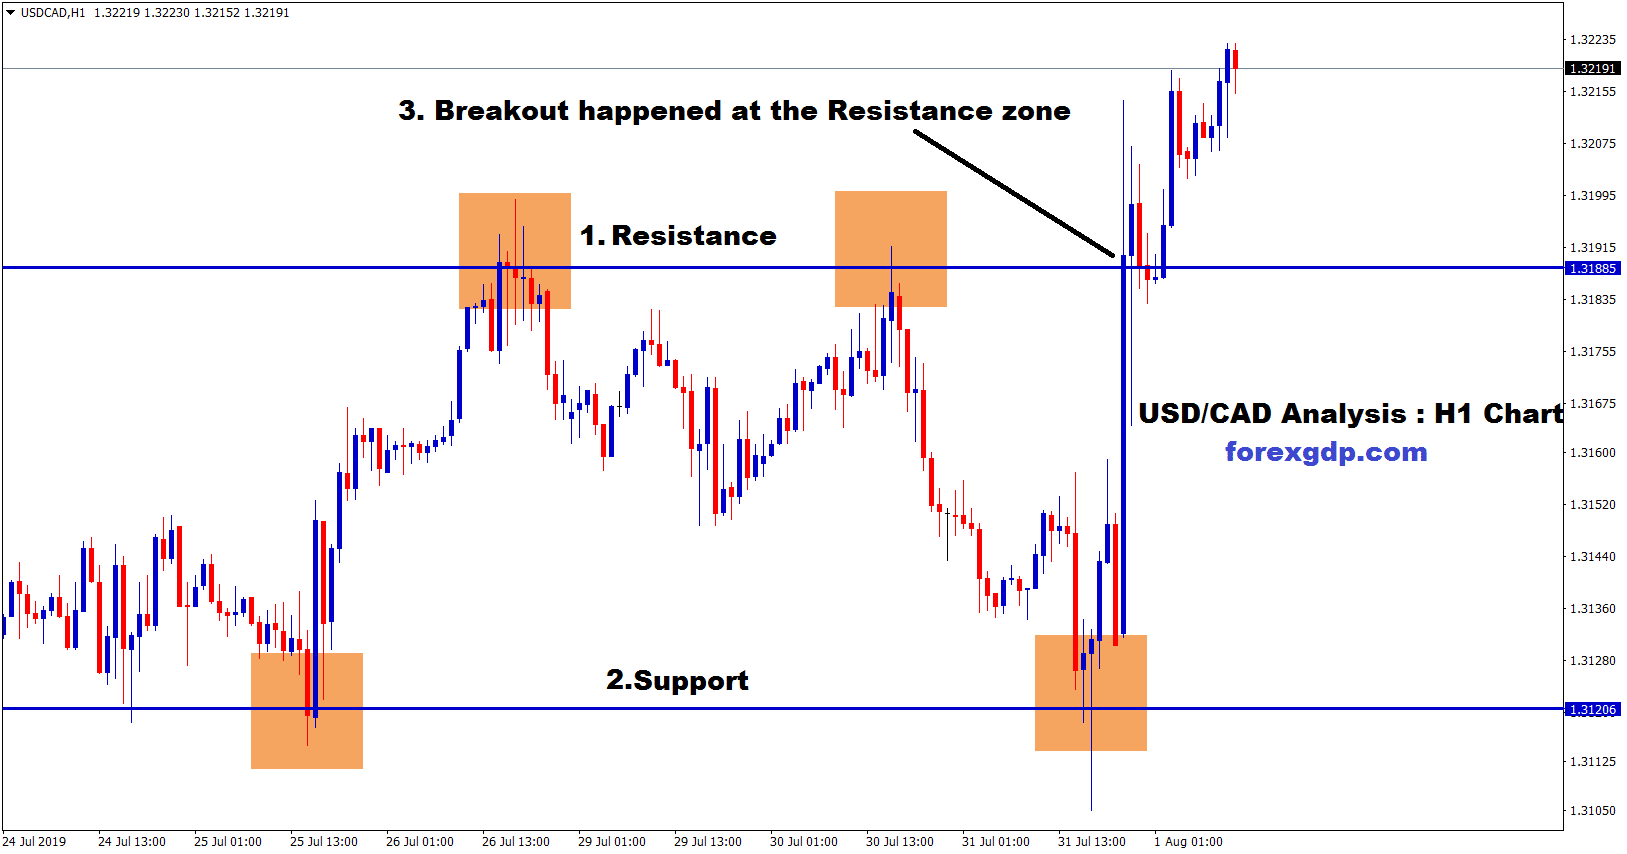 usd cad broken the resistance zone in H1 chart